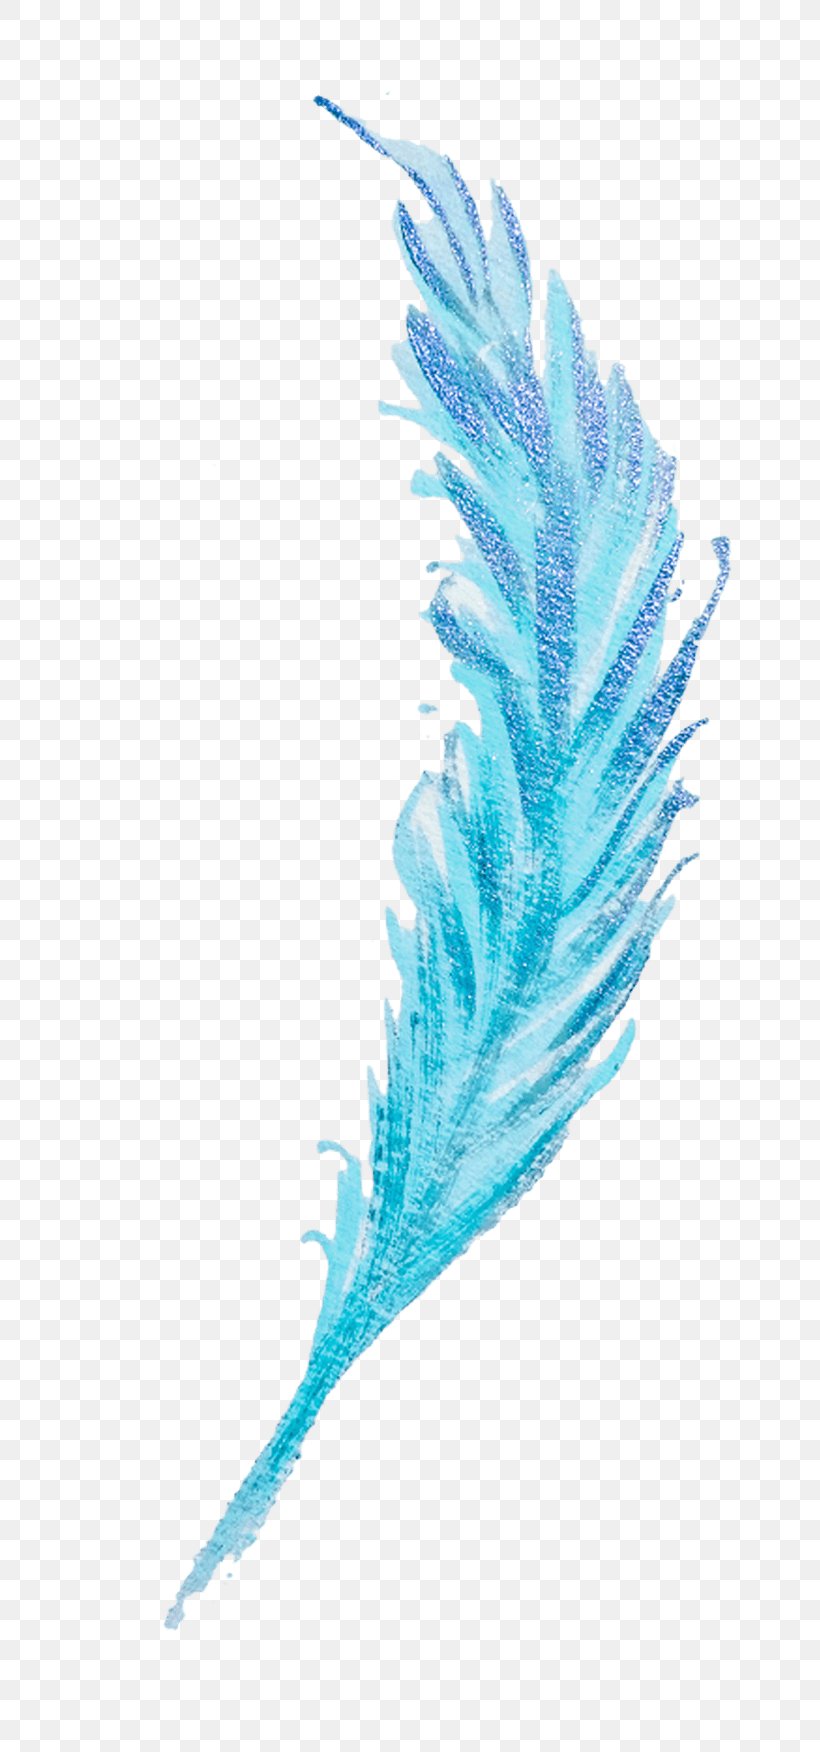 Feather Image Watercolor Painting Design, PNG, 804x1752px, Feather, Blue, Color, Fashion Accessory, Peafowl Download Free